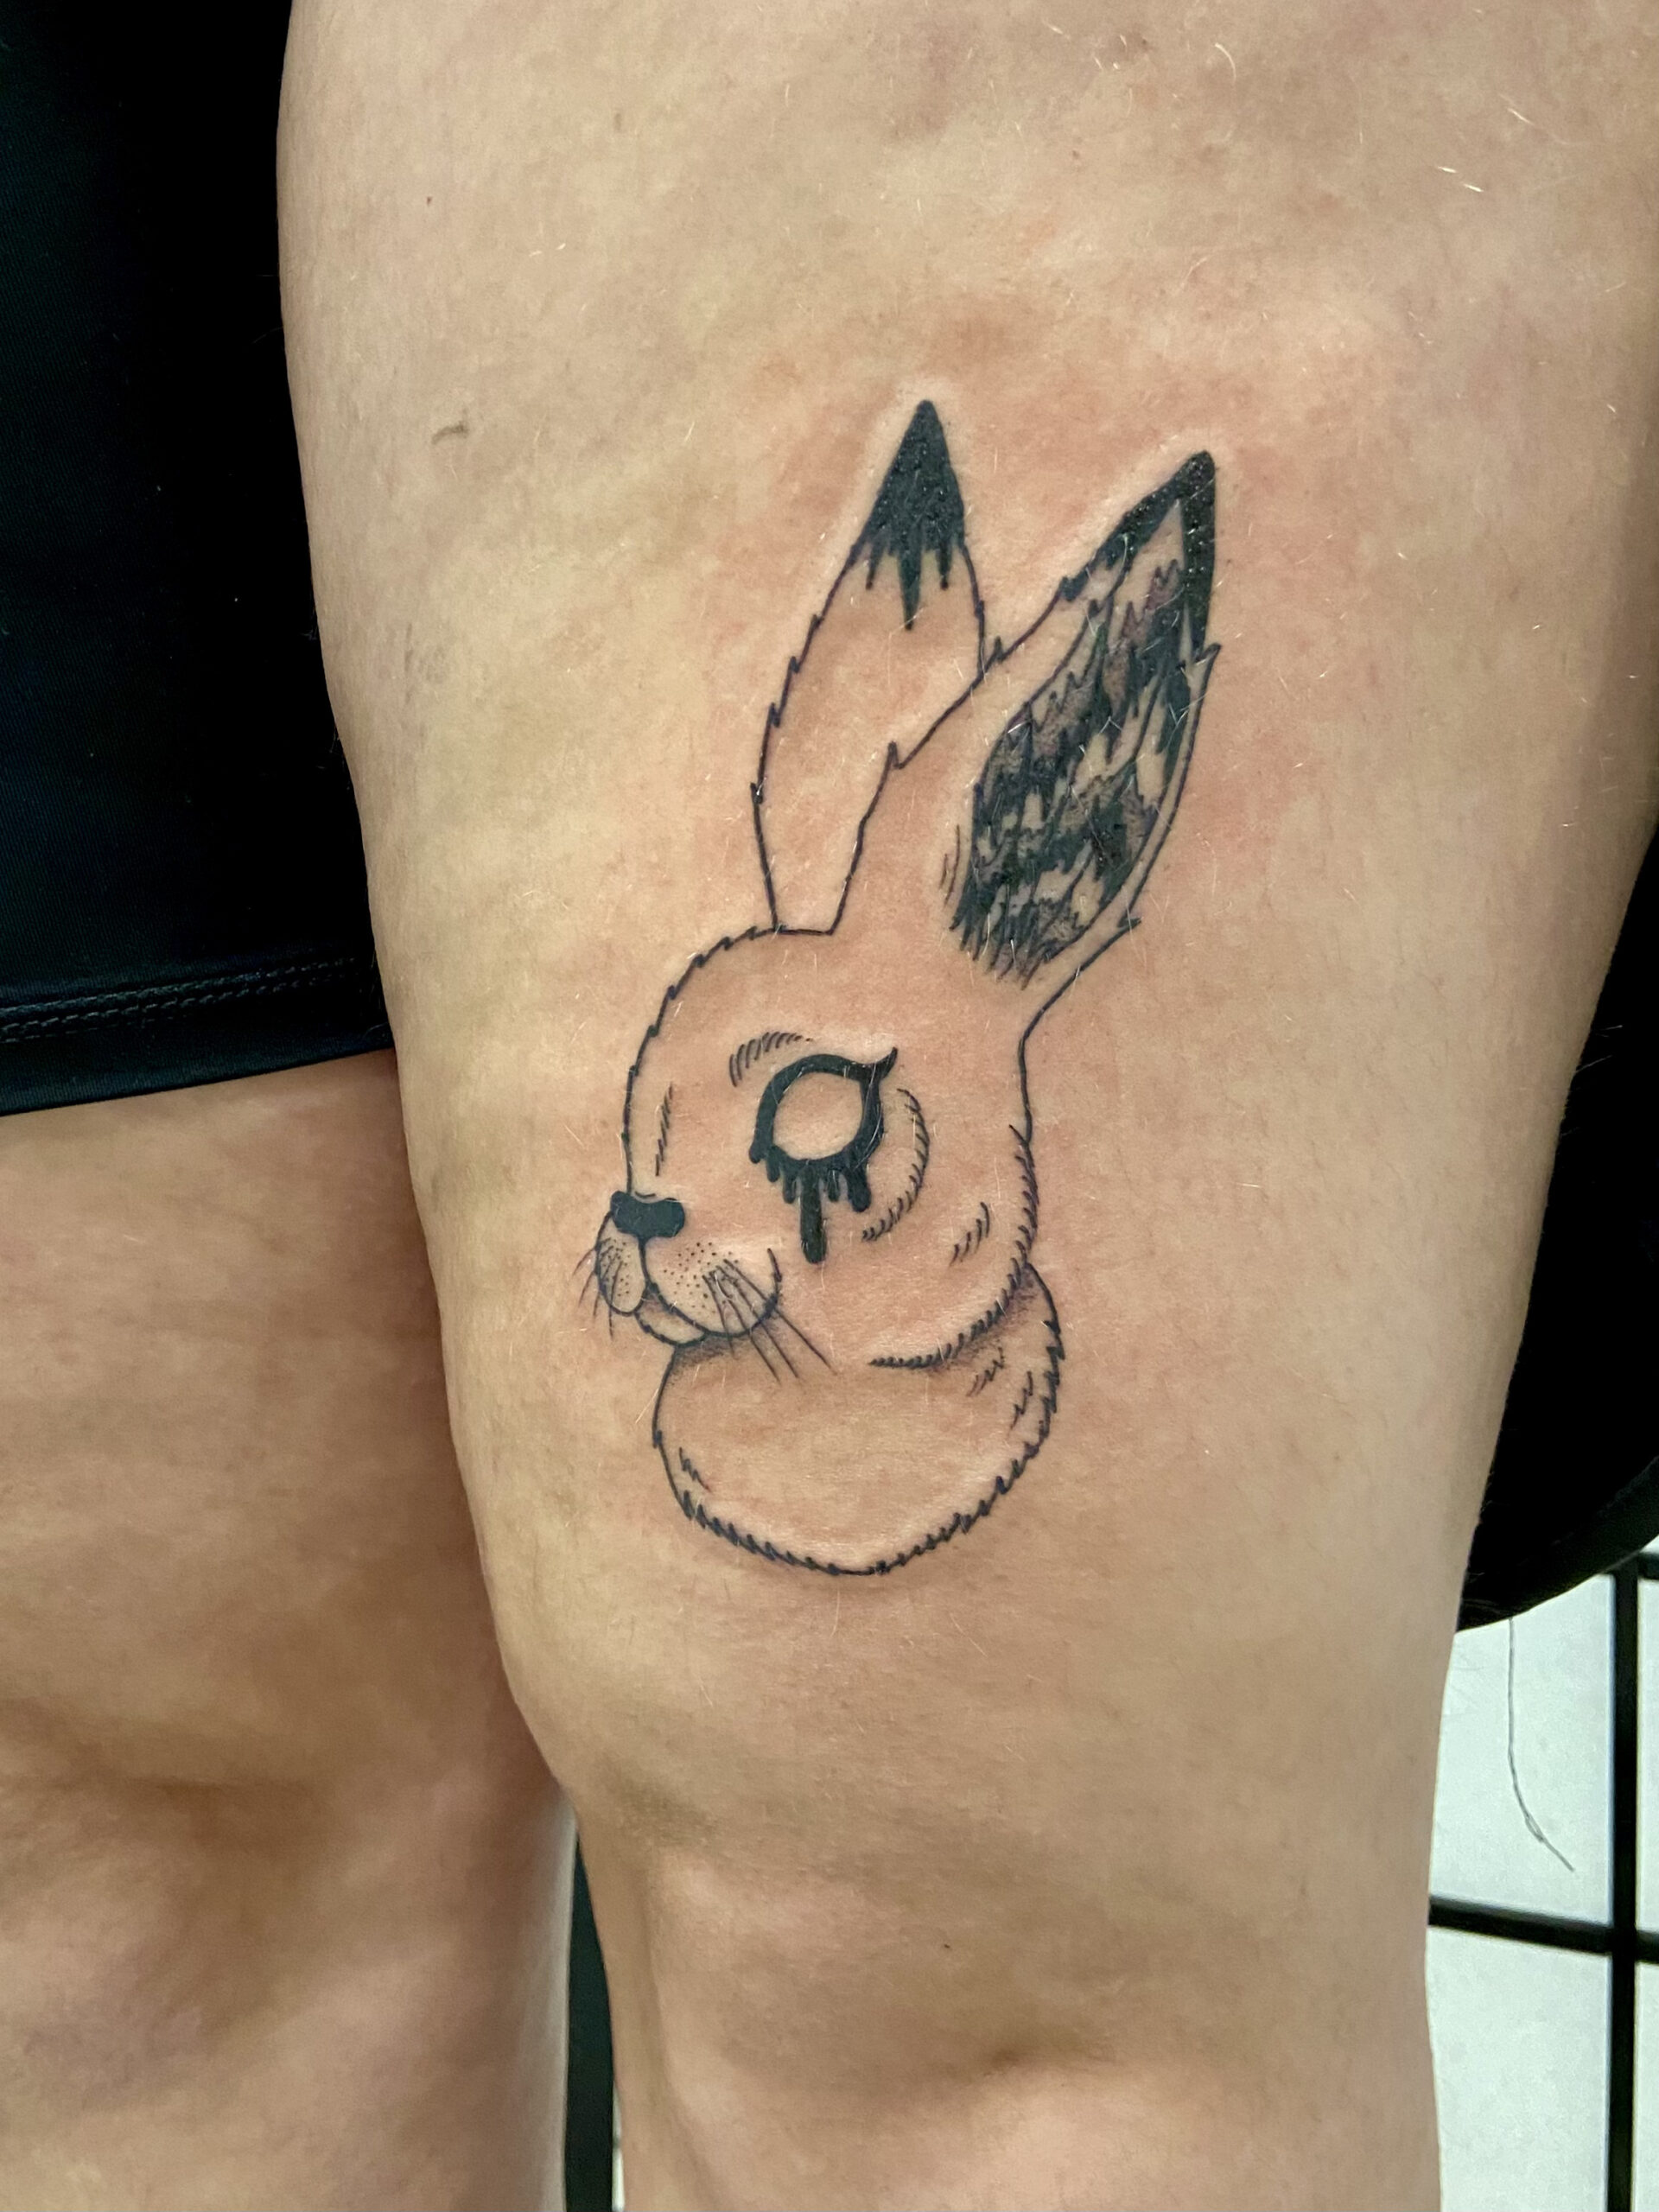 I grew up with pet rabbits and finally got the tattoo to show my love for  them ❤️ : r/Bunnies